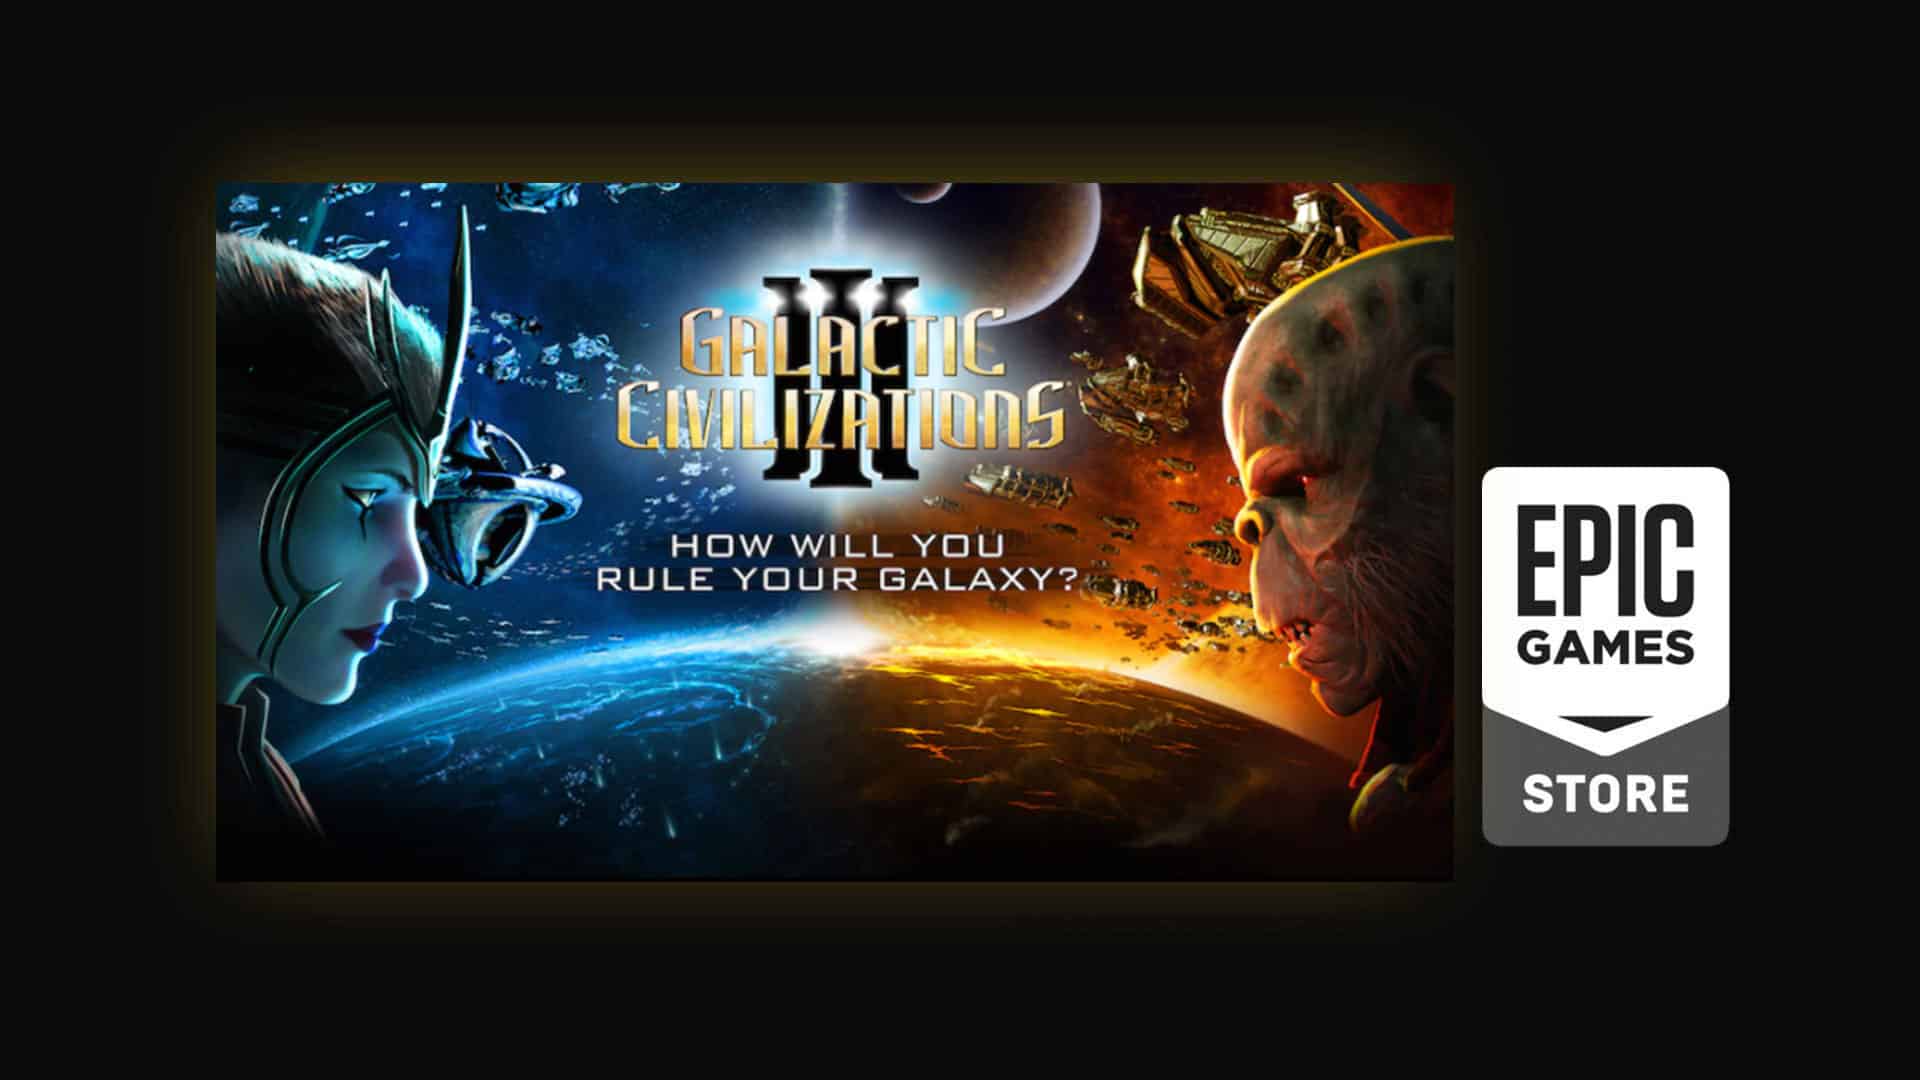 epic games free game 2022 Galactic Civilizations 3